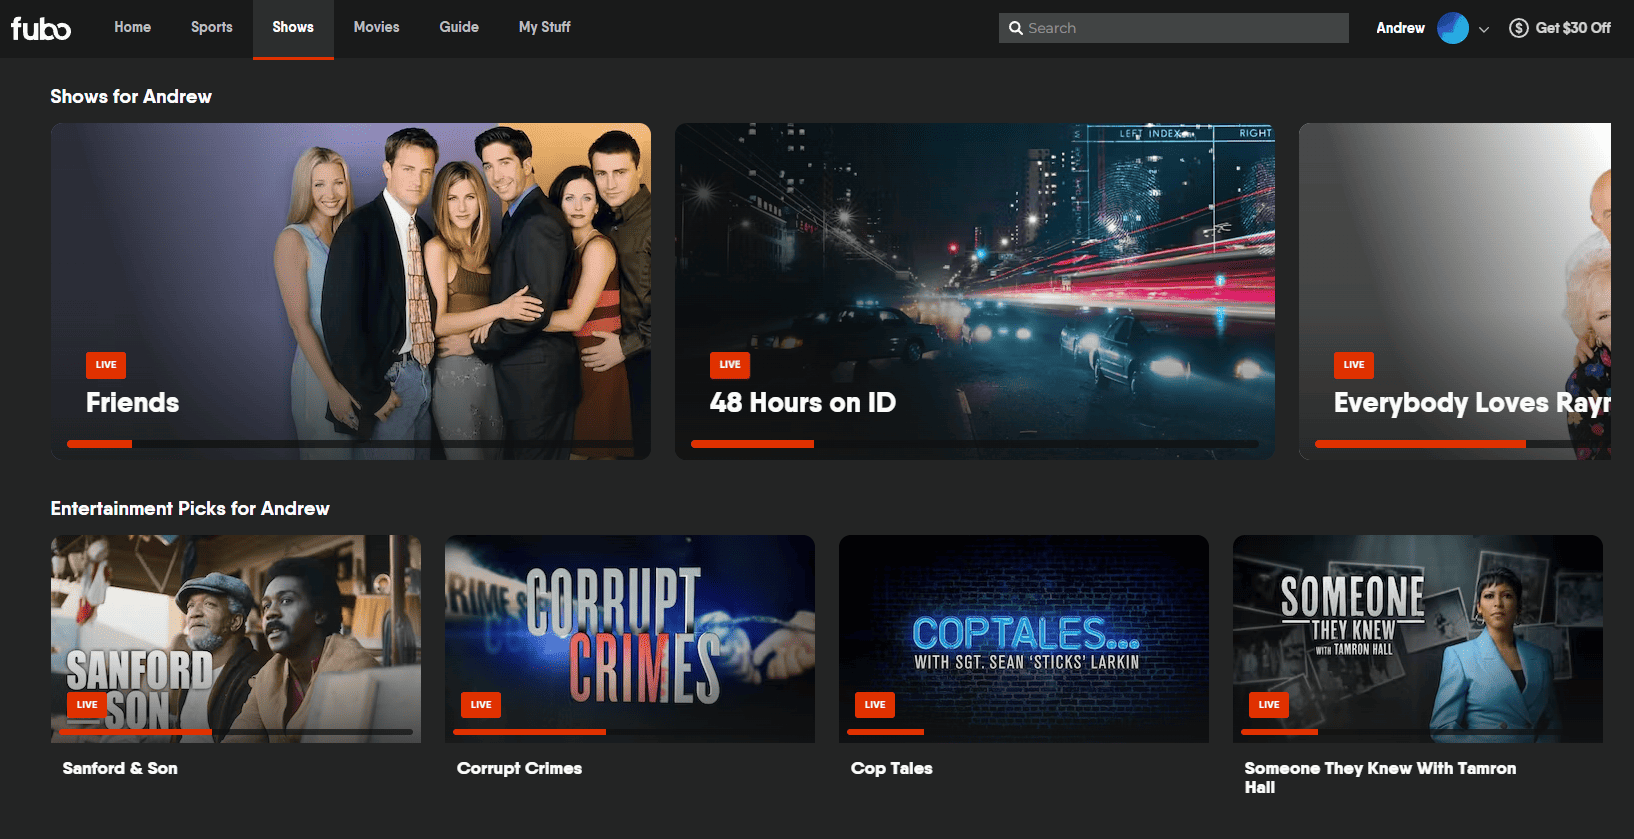 Screenshot of different shows listed under the Shows tab on fuboTV